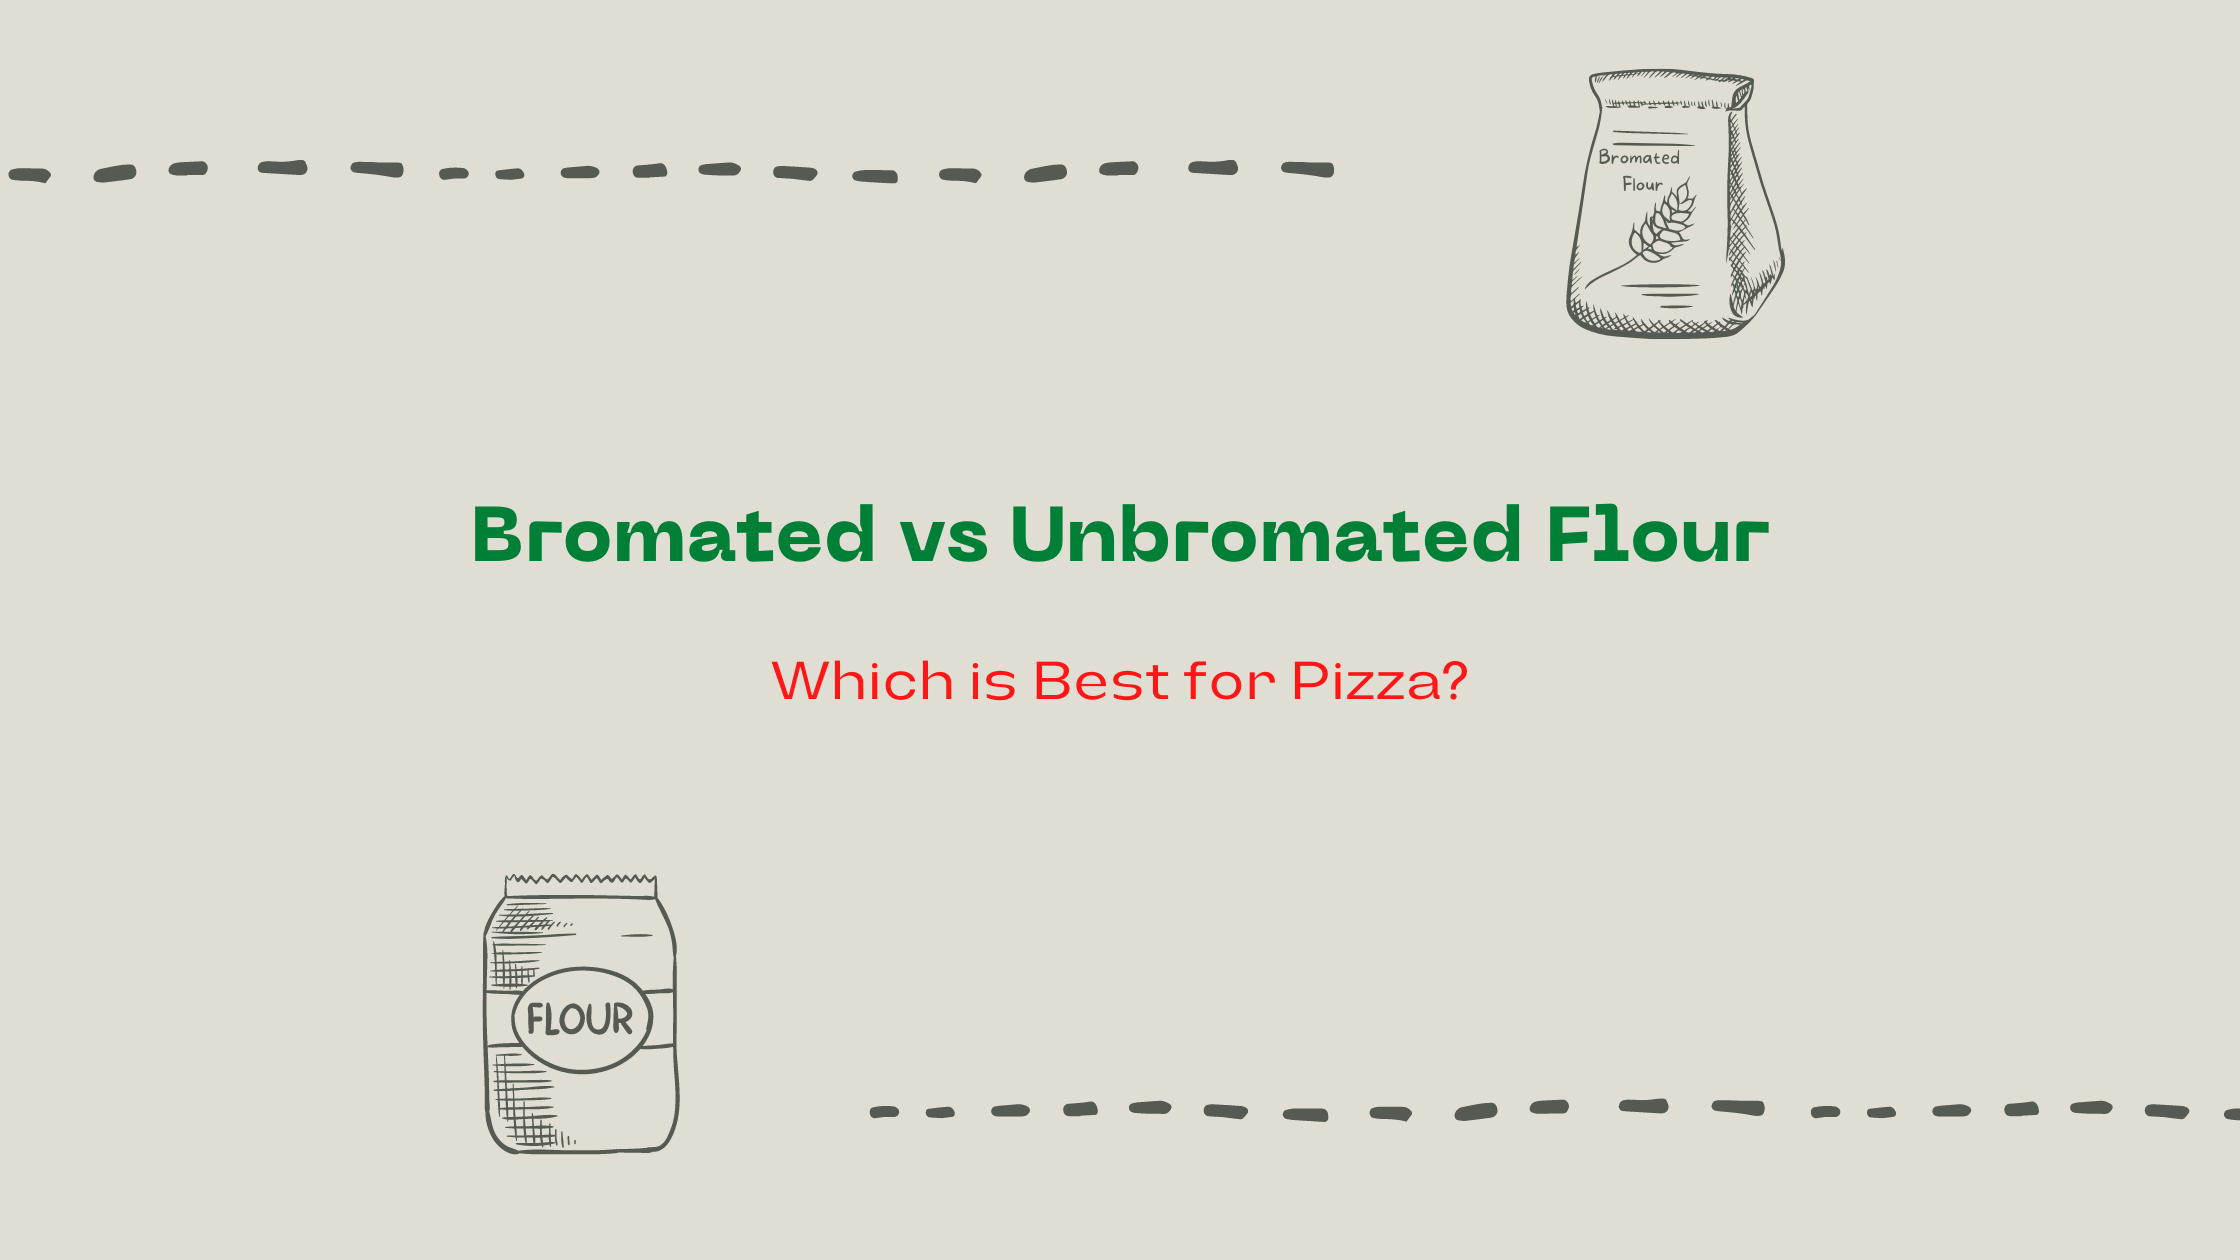 Bromated vs Unbromated Flour for Pizza: Here’s What You Need to Know